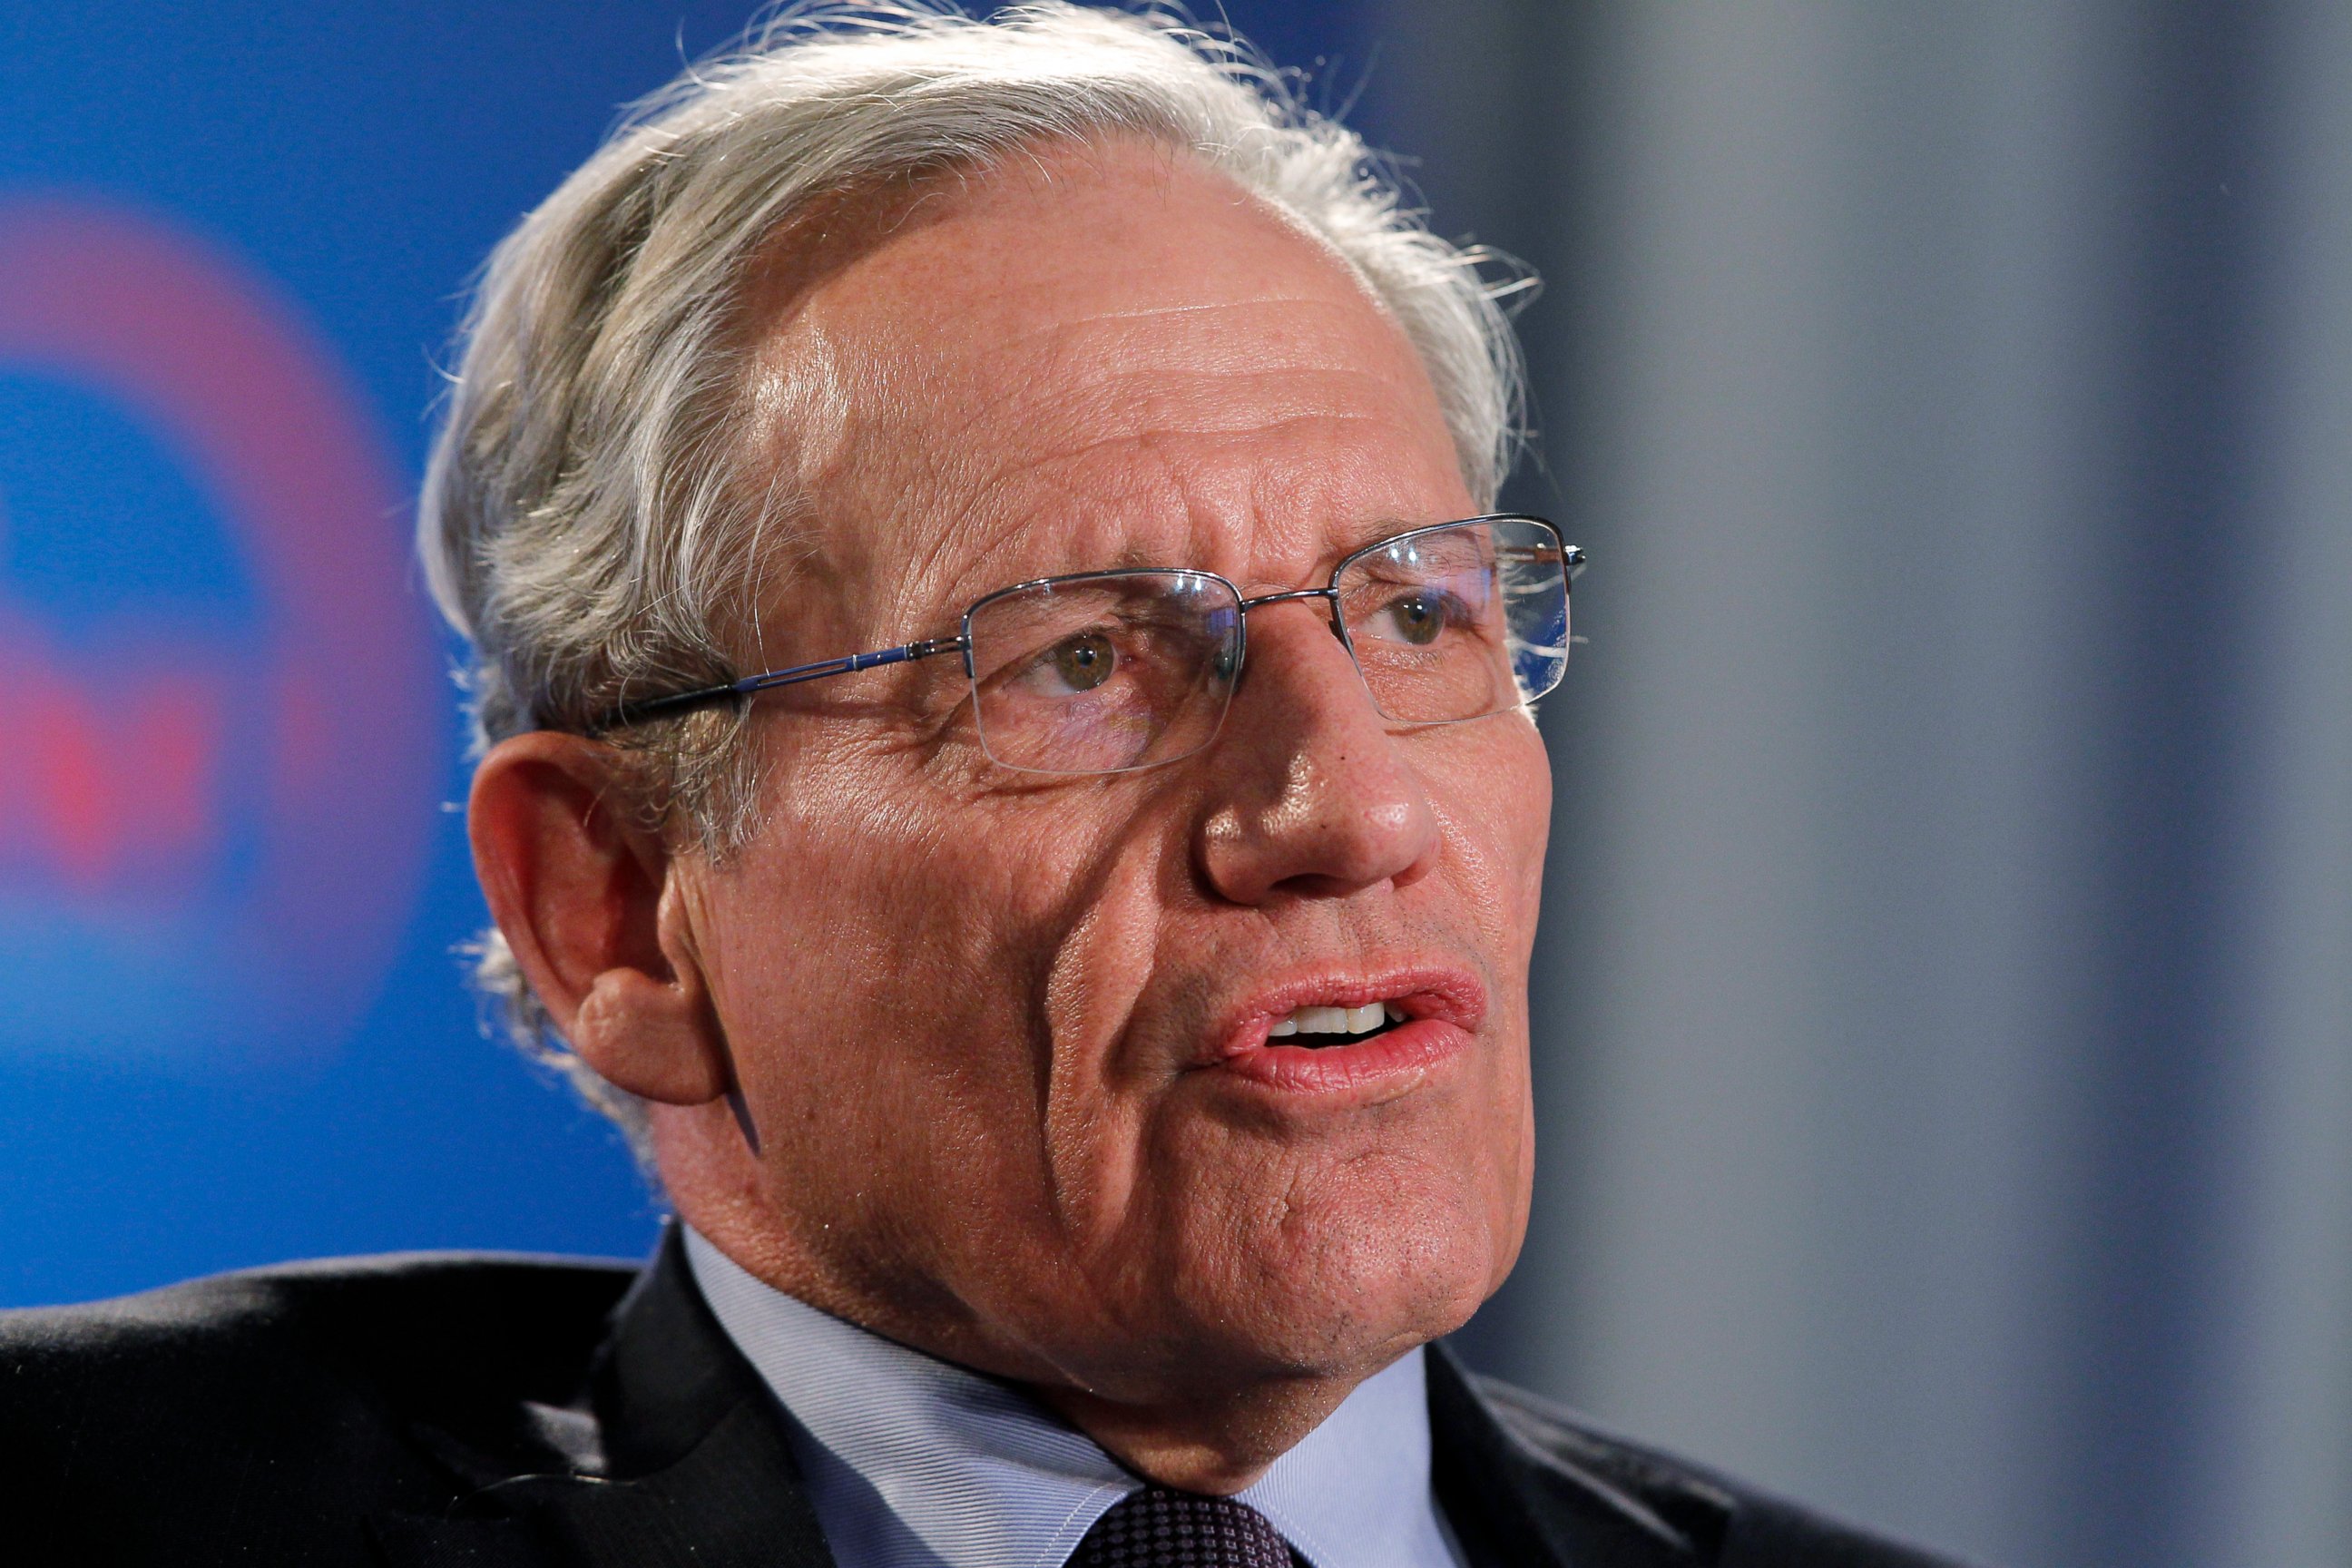 PHOTO: Bob Woodward is set to release a new book on President Donald Trump, titled "Fear: Trump in the White House," on Sept. 11, 2018.